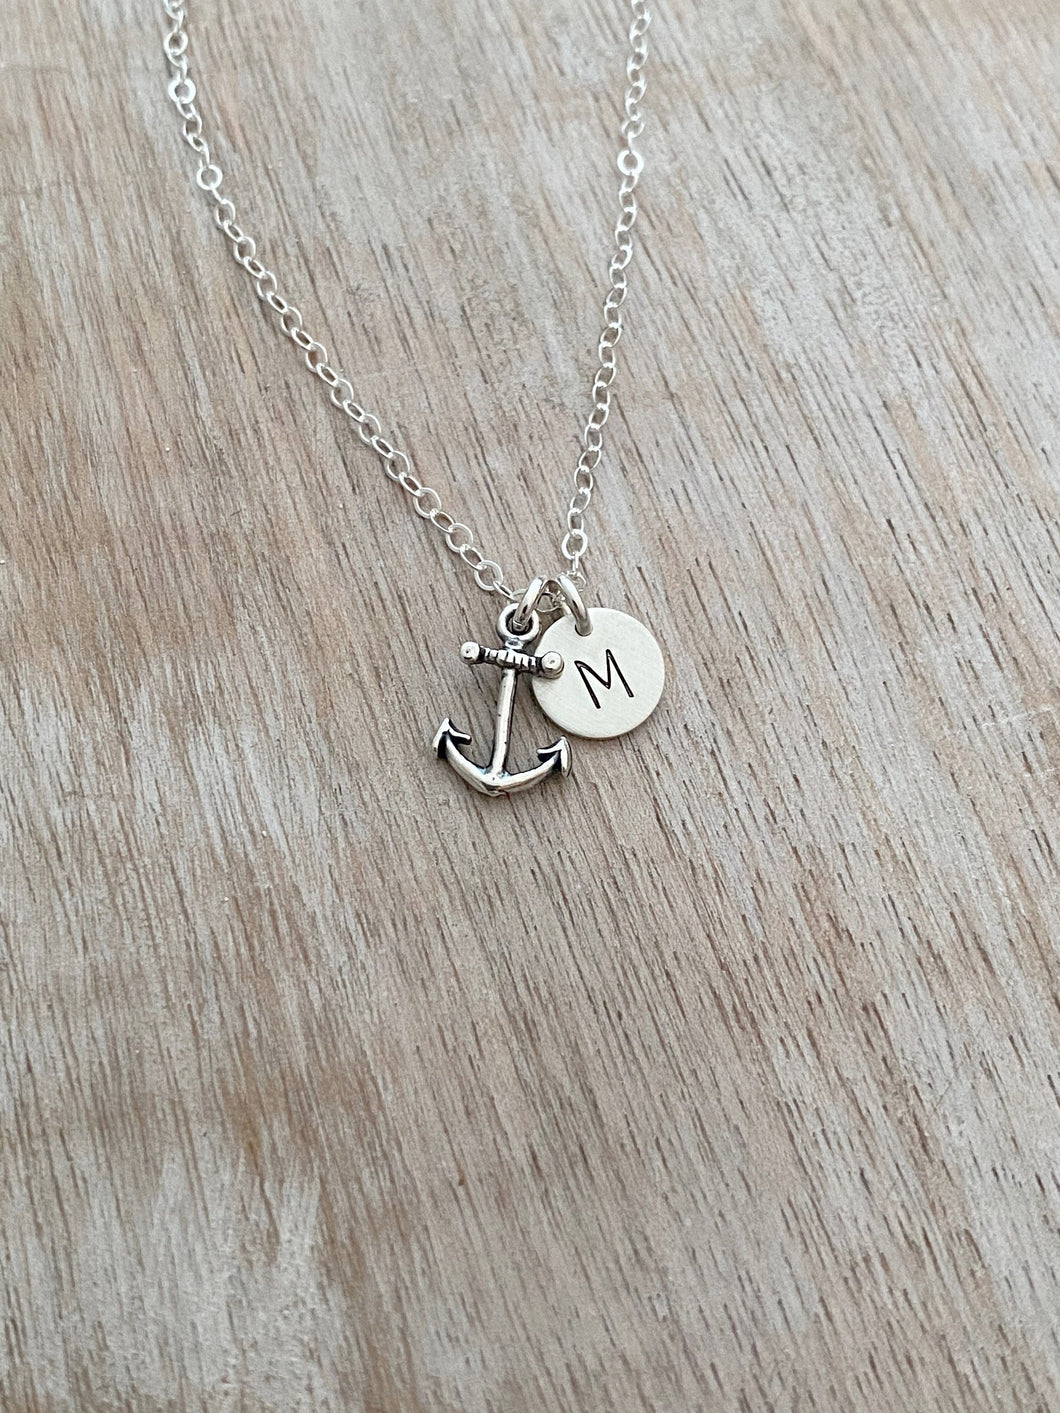 Sterling silver Anchor Necklace, Mini Initial Jewelry - Sterling Silver Personalized Initial Necklace, Simple Monogram Single Charm Rustic